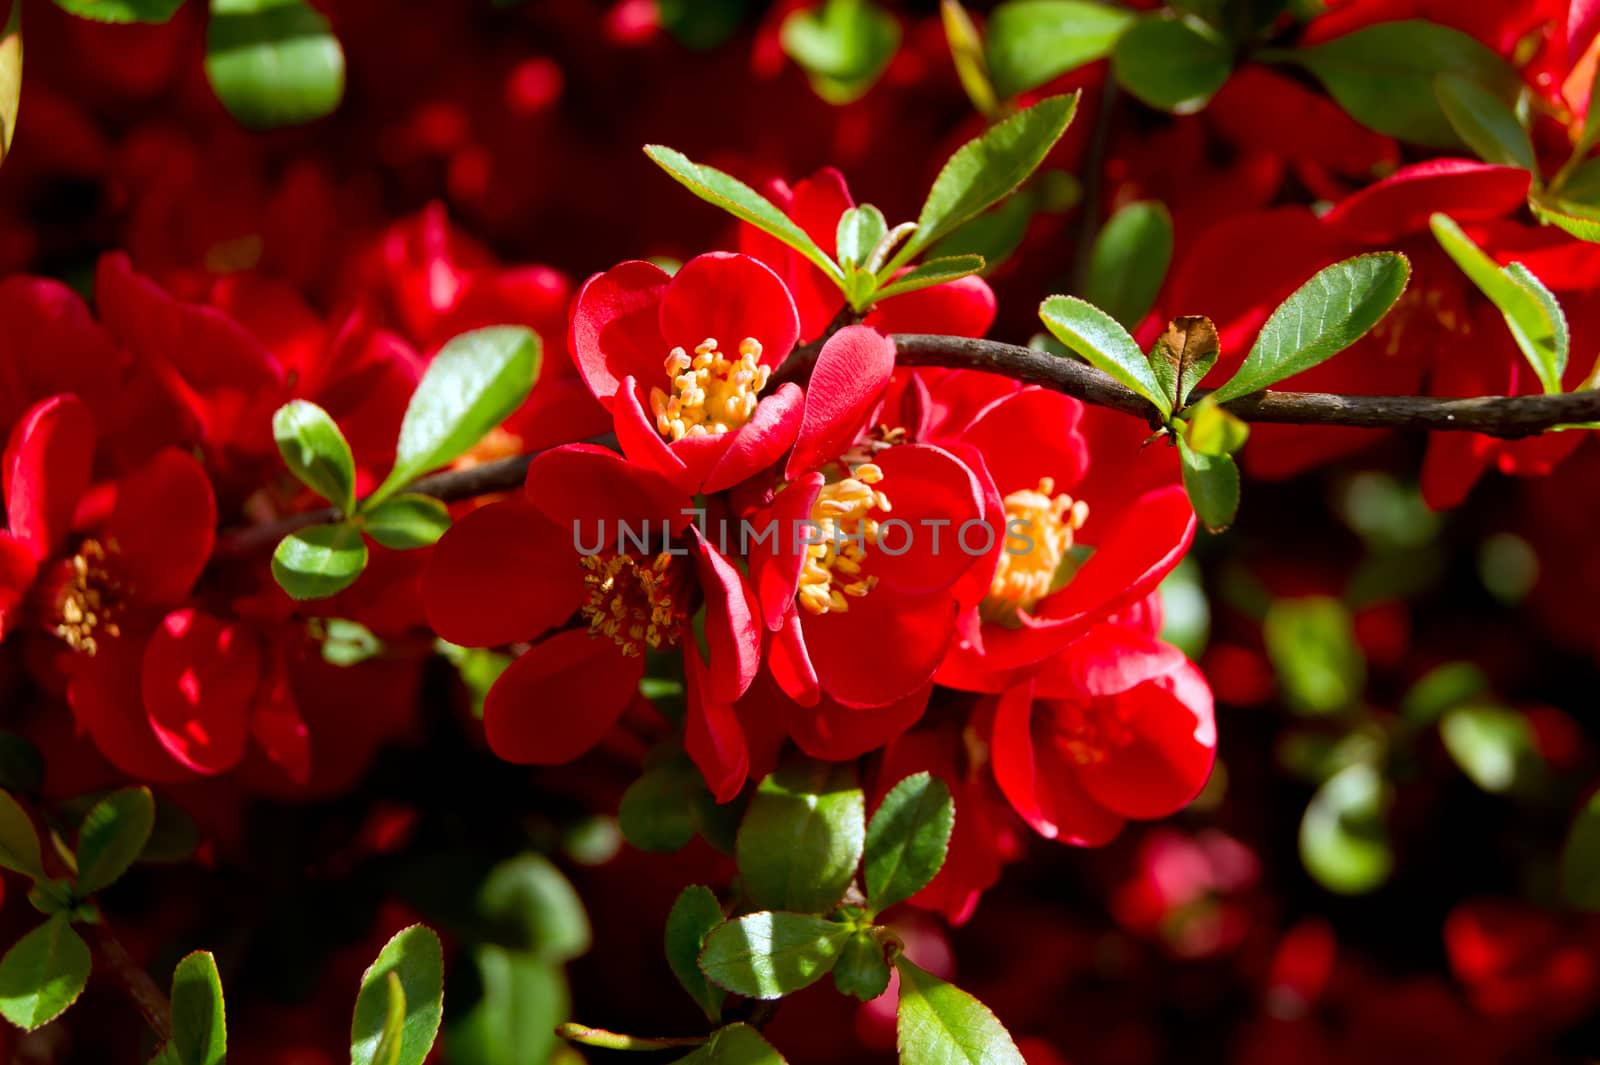 Japanese Quince (Chaenomeles japonica) by dadalia